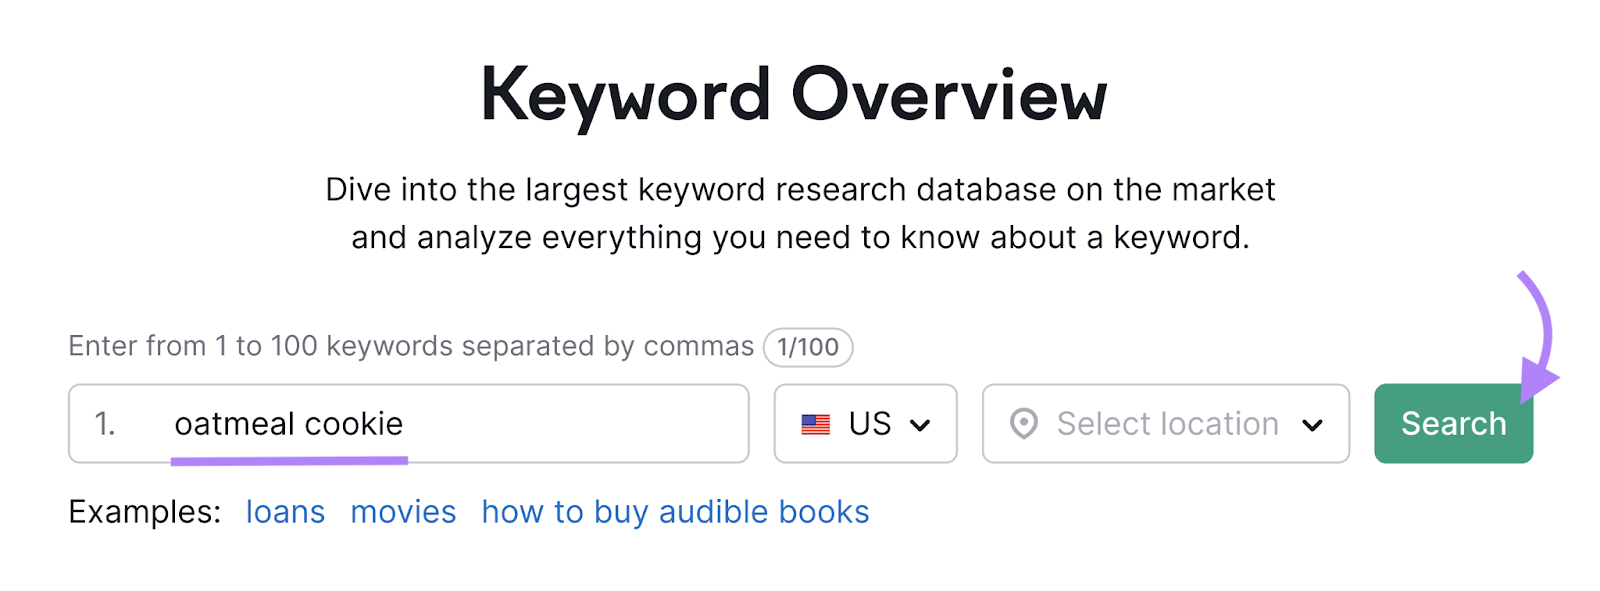 search for "oatmeal cookie" successful  Keyword Overview tool